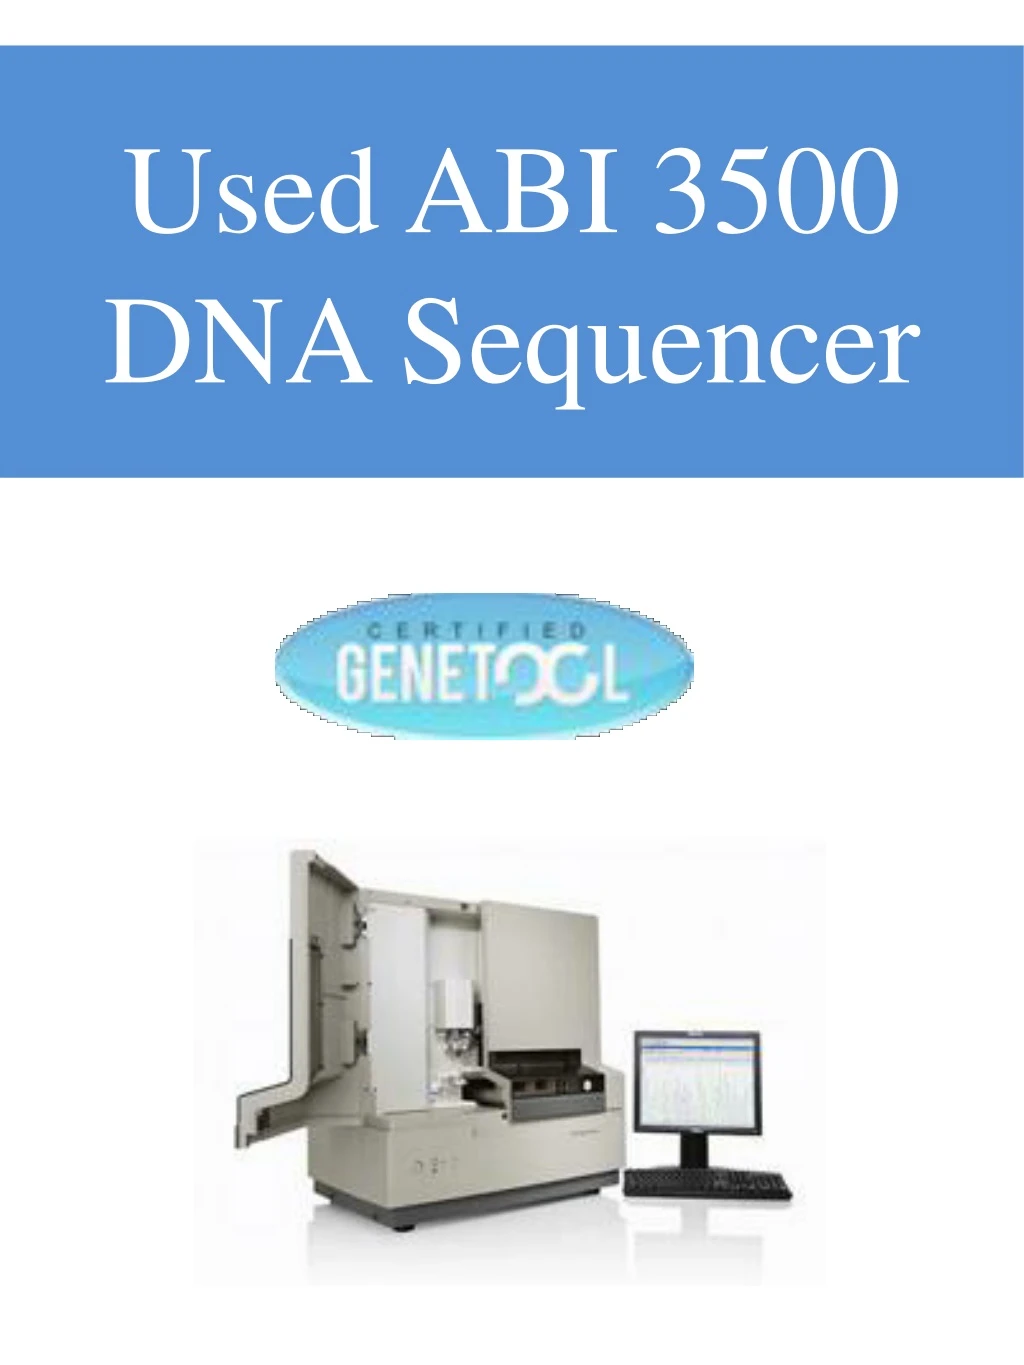 used abi 3500 dna sequencer